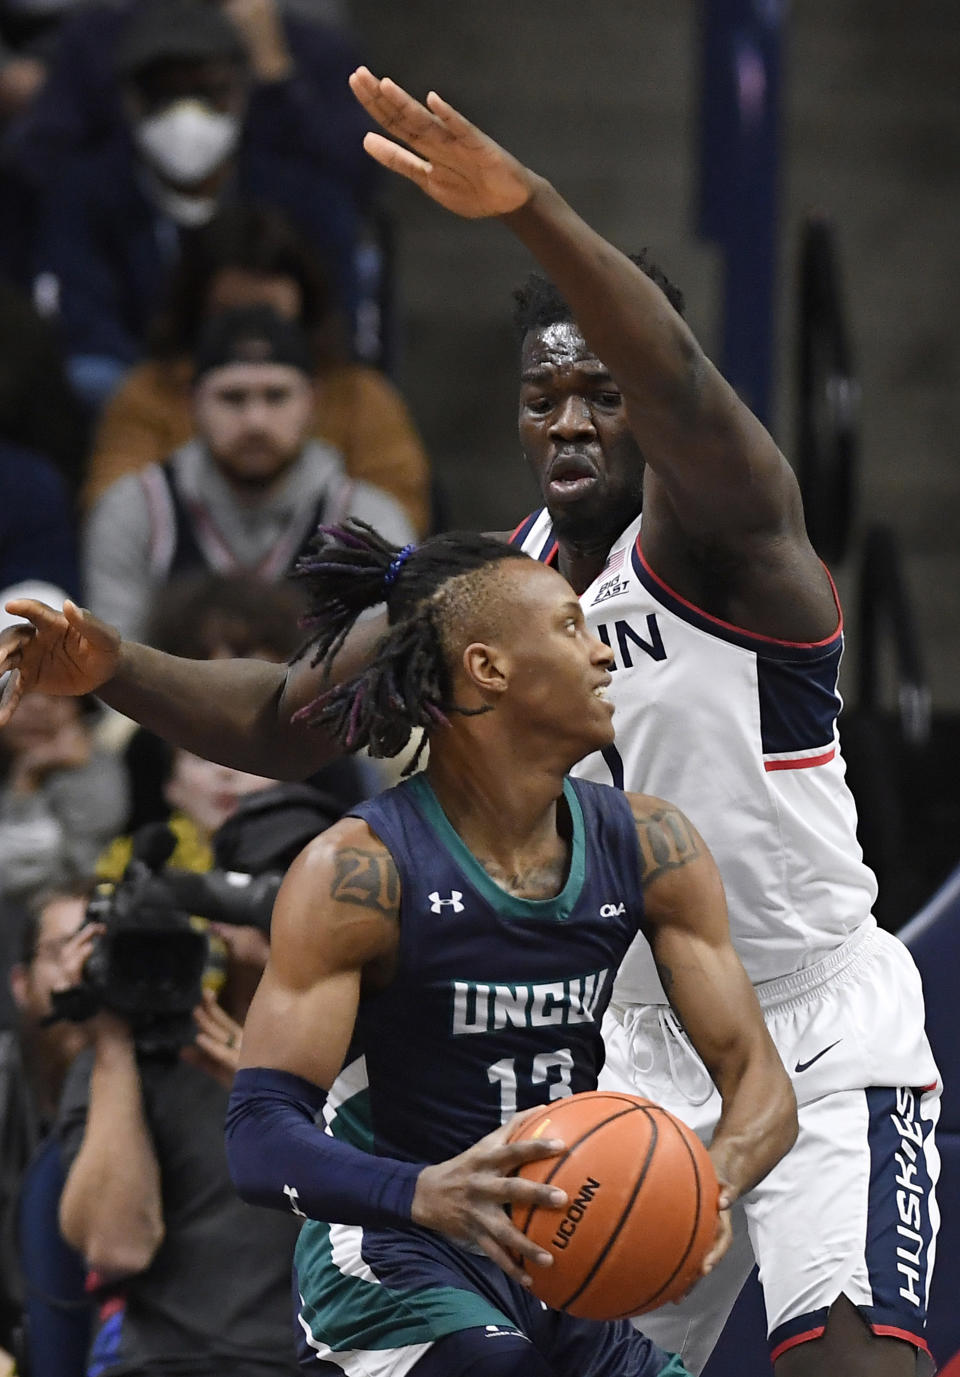 UNC Wilmington forward Trazarien White is guarded by Connecticut's Adama Sanogo, right, during the first half of an NCAA college basketball game Friday, Nov. 18, 2022, in Storrs, Conn. (AP Photo/Jessica Hill)